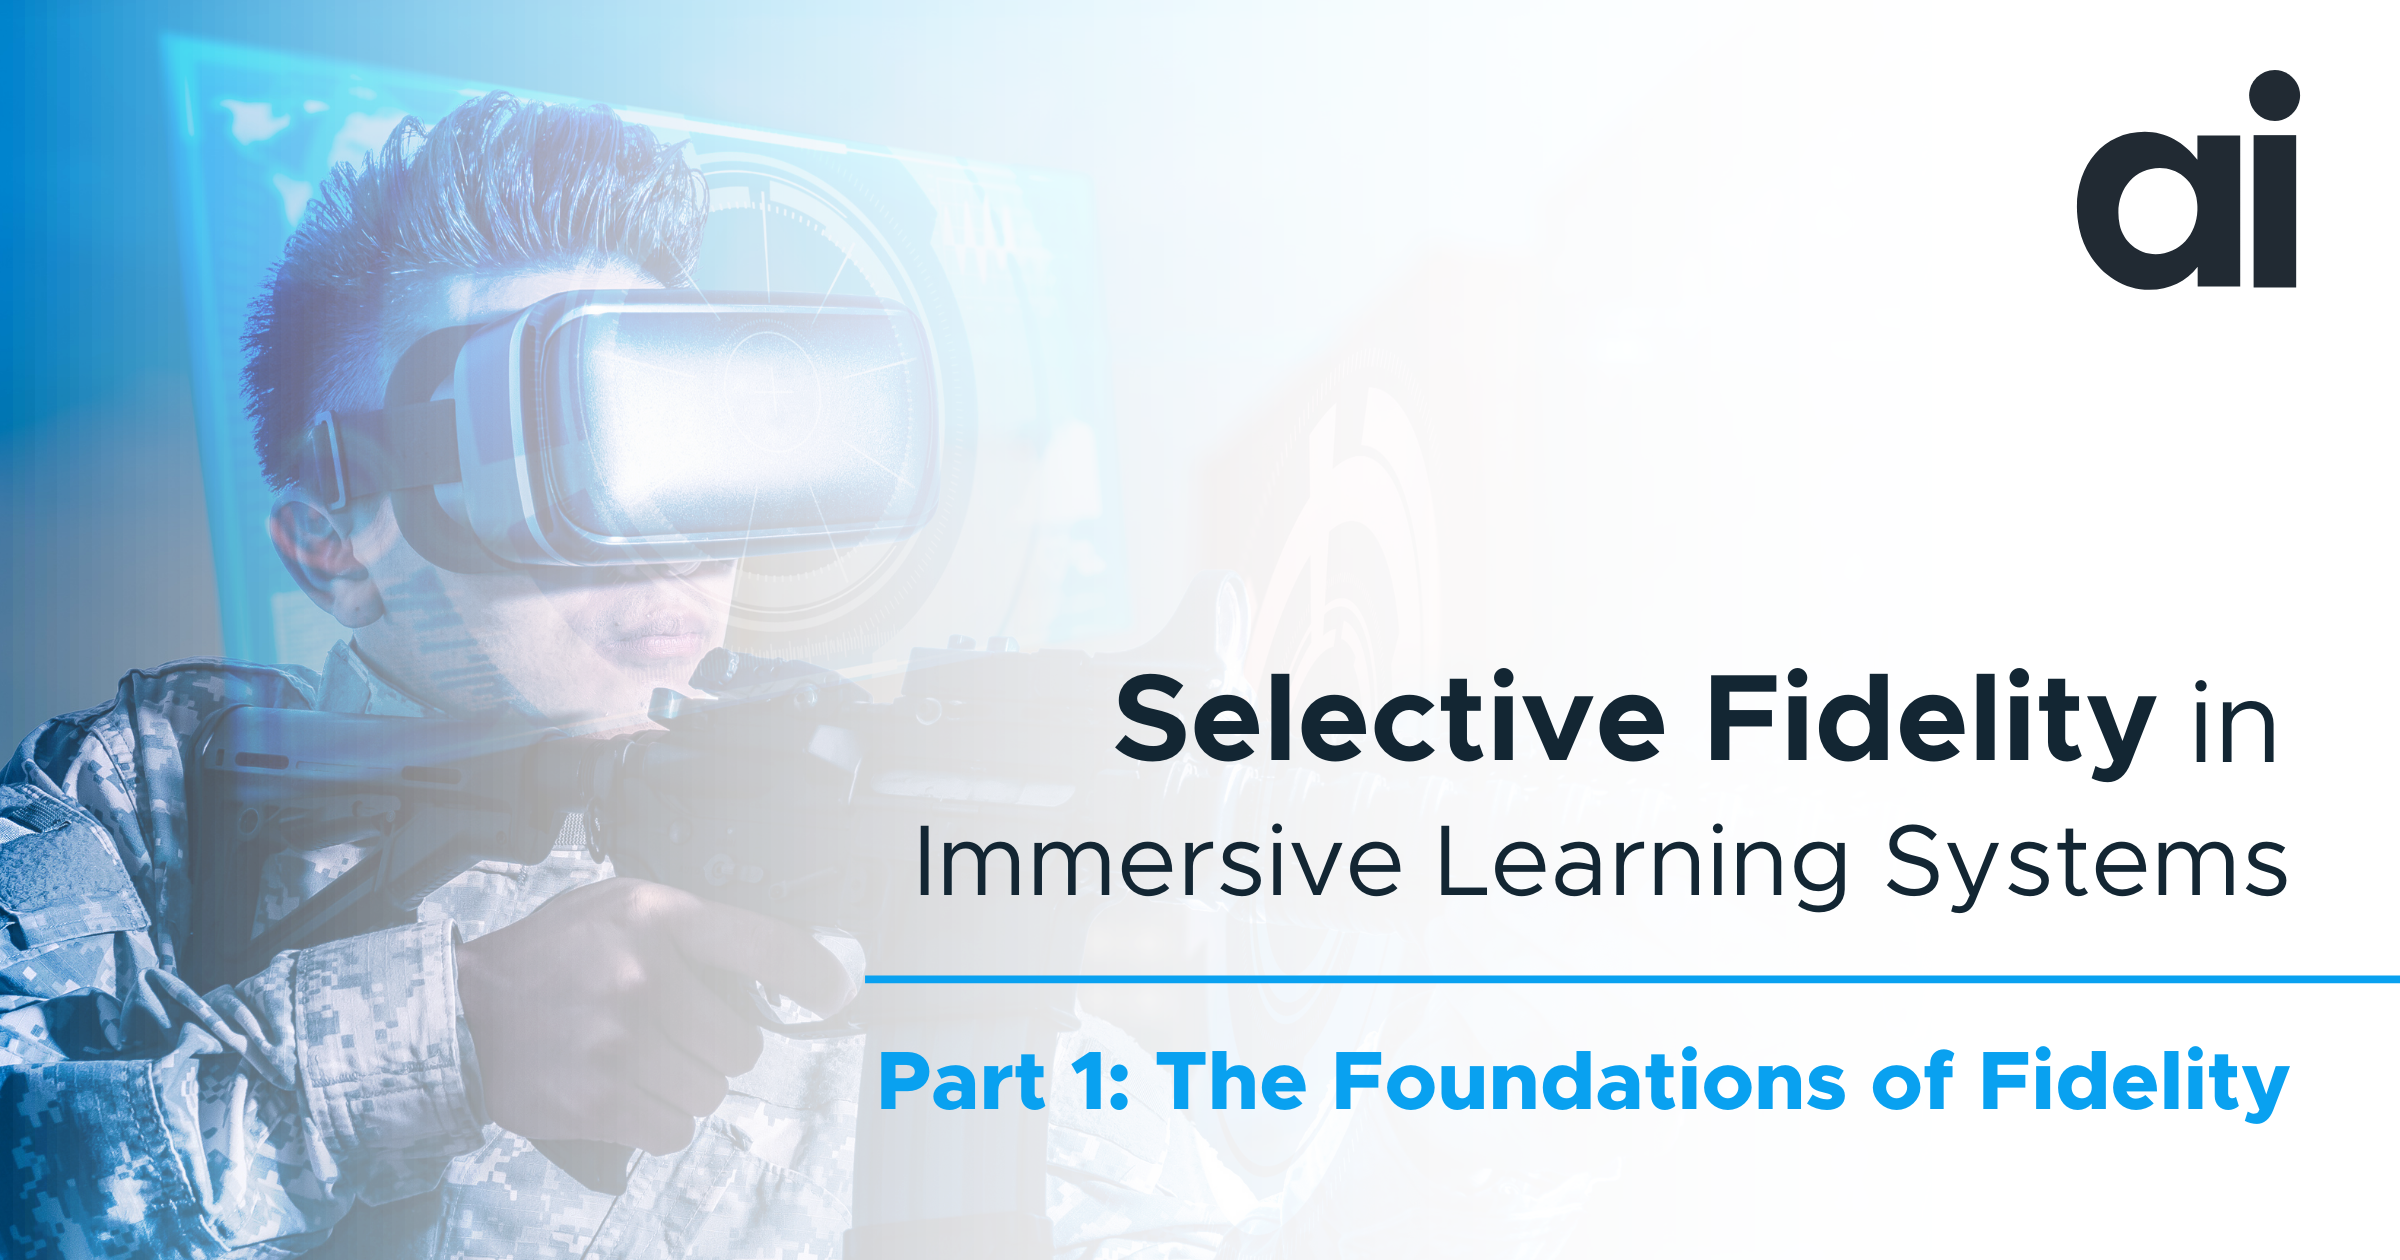 Selective Fidelity in Immersive Learning Systems - Part 1: The Foundations of Fidelity